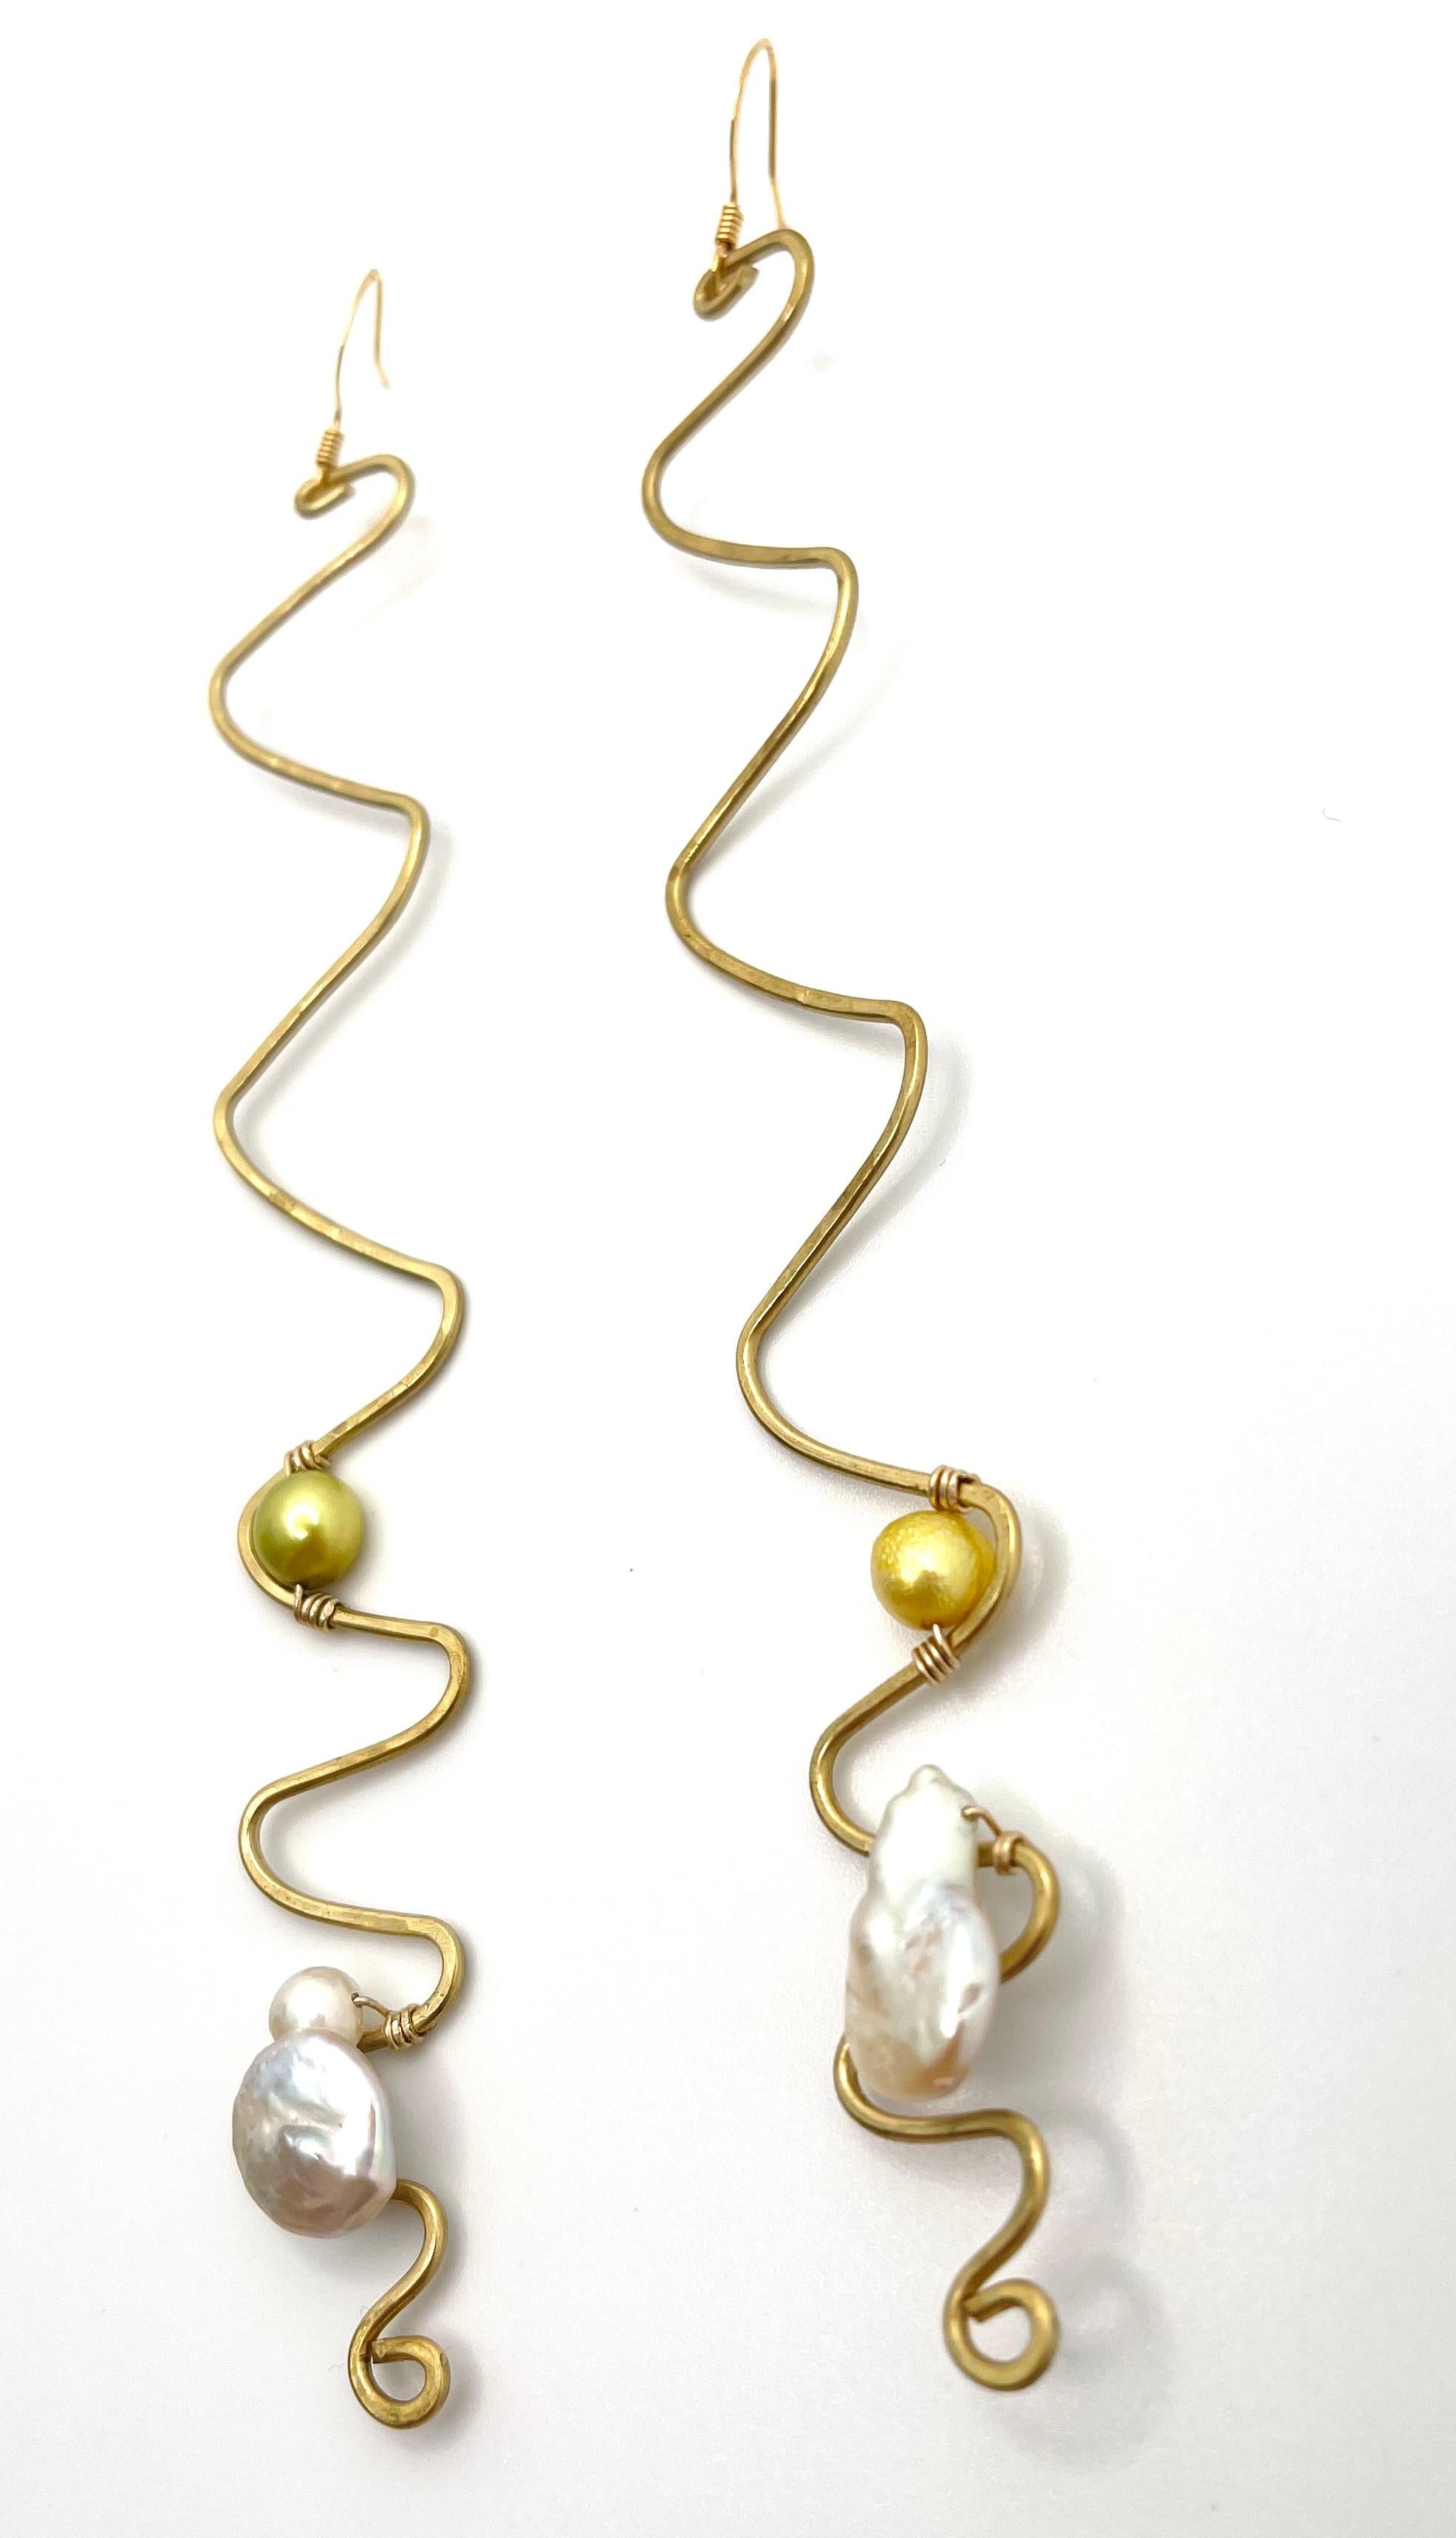 Handmade Freshwater Pearls Wavy Fleur Earrings by Sidney Cherie Studio

Long, zig-zag gold brass cascades to the shoulders in these Wavy Fleur Earrings. The long wave emulates having a cascade of wavy natural hair. The minimalist layout of the green